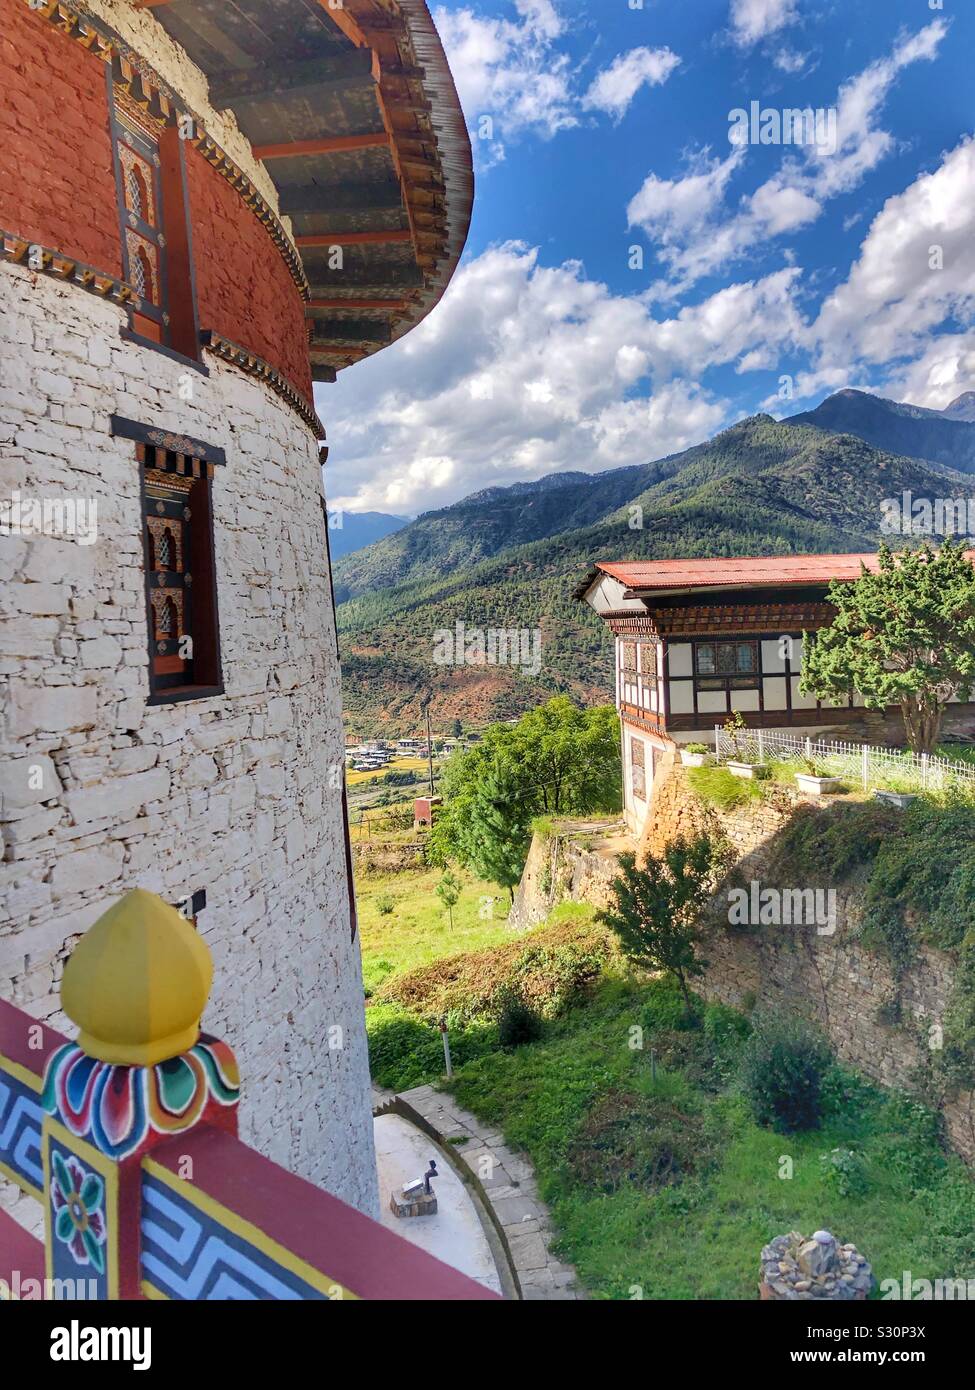 Traditional architecture in picturesque Bhutan. Stock Photo